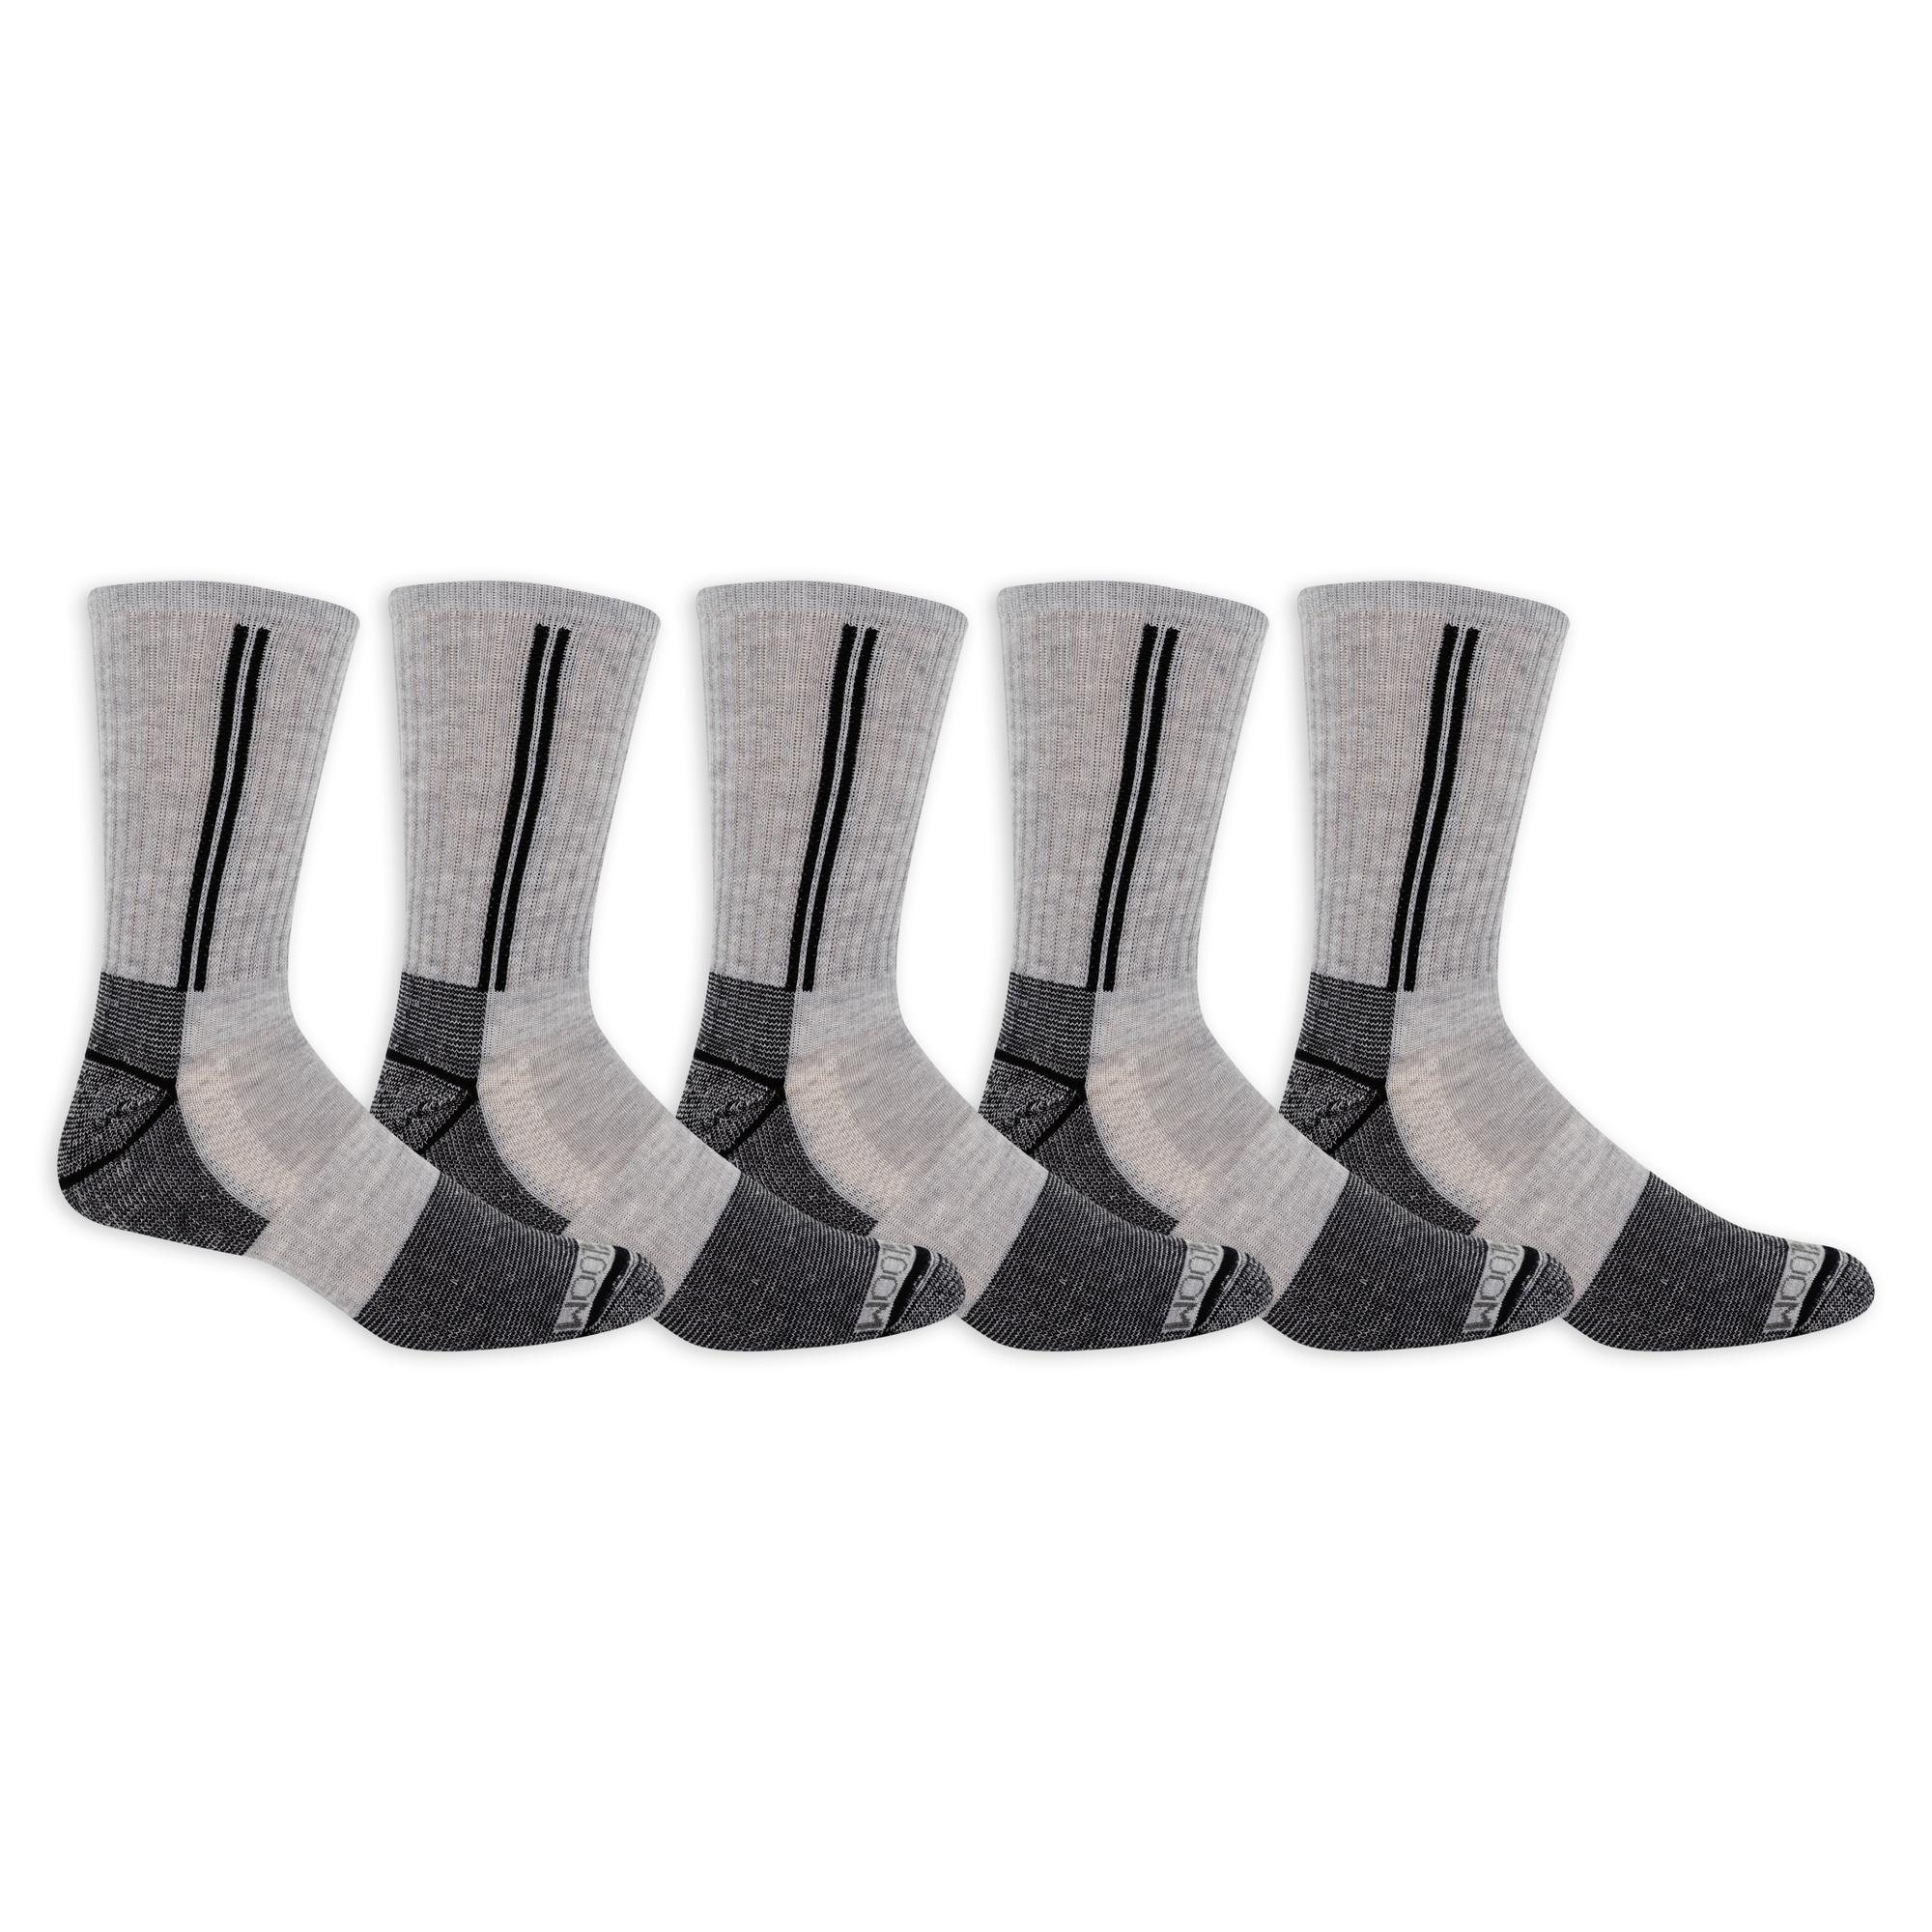 Fruit of the Loom, MENS WORK GEAR CREW SOCK 5 PAIR PACK, Size M, Pairs (qty.) 5, Color Gray, Model FRM10542C